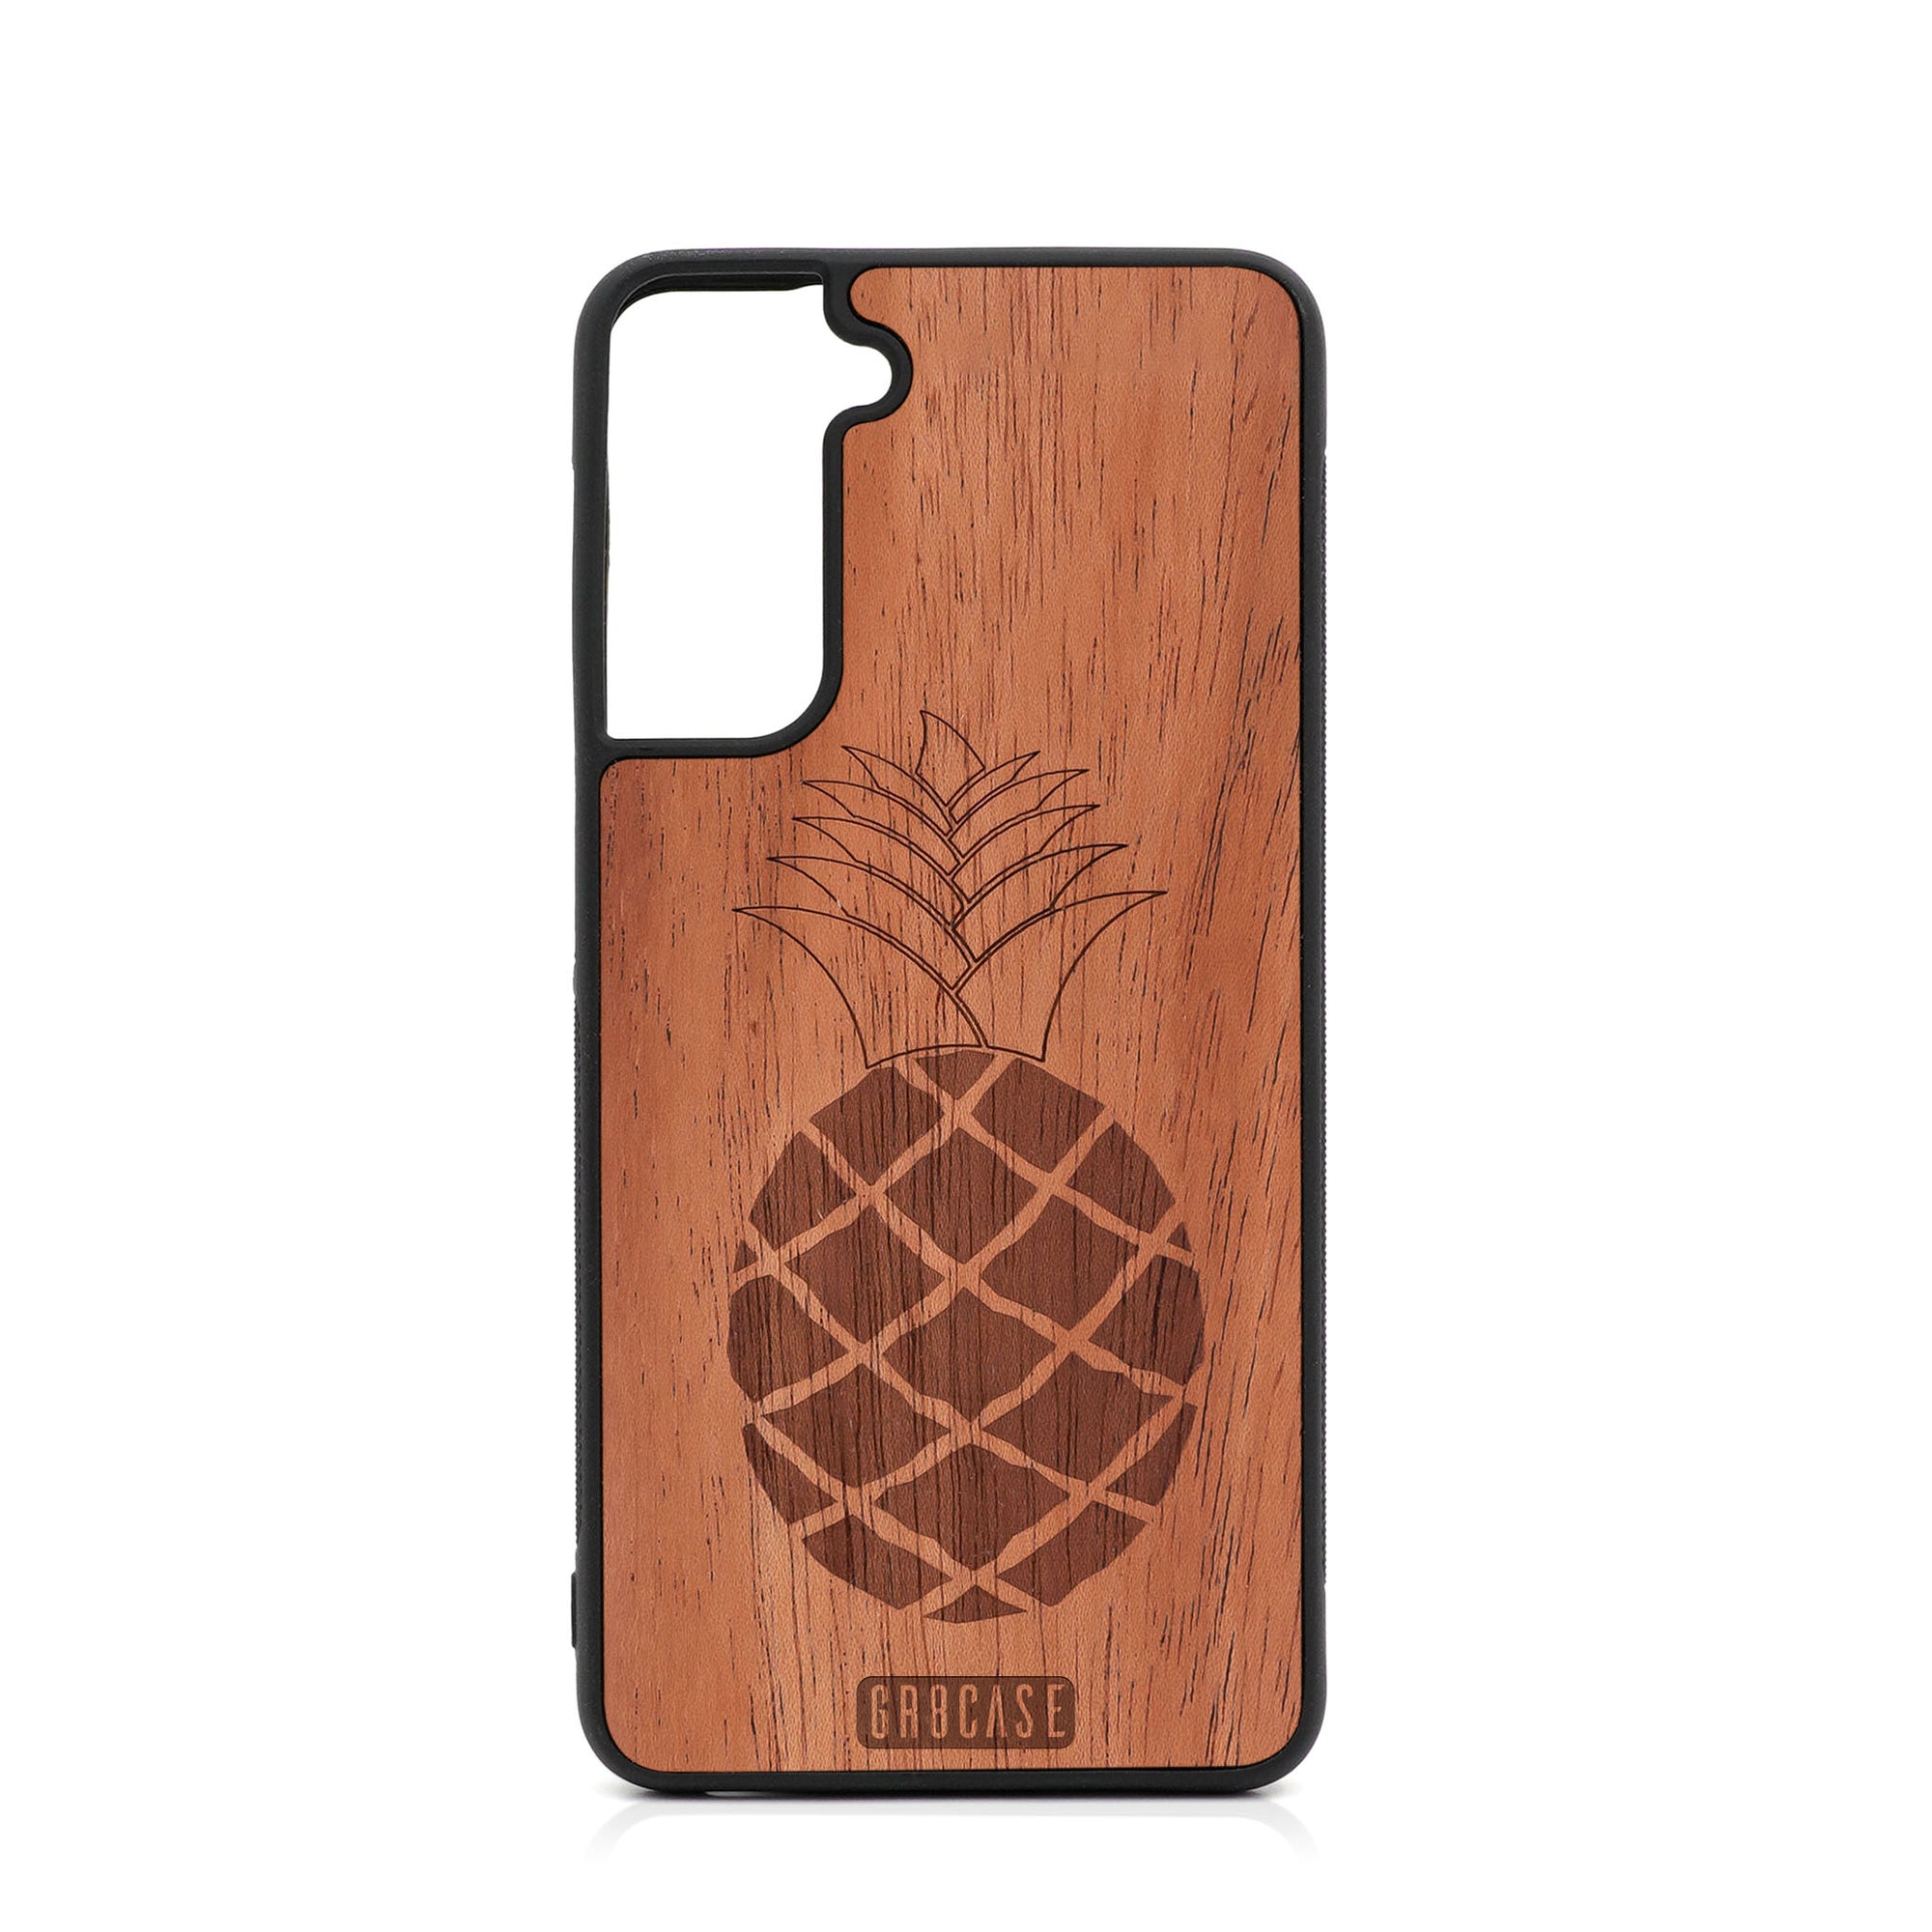 Pineapple Design Wood Case For Samsung Galaxy S21 5G